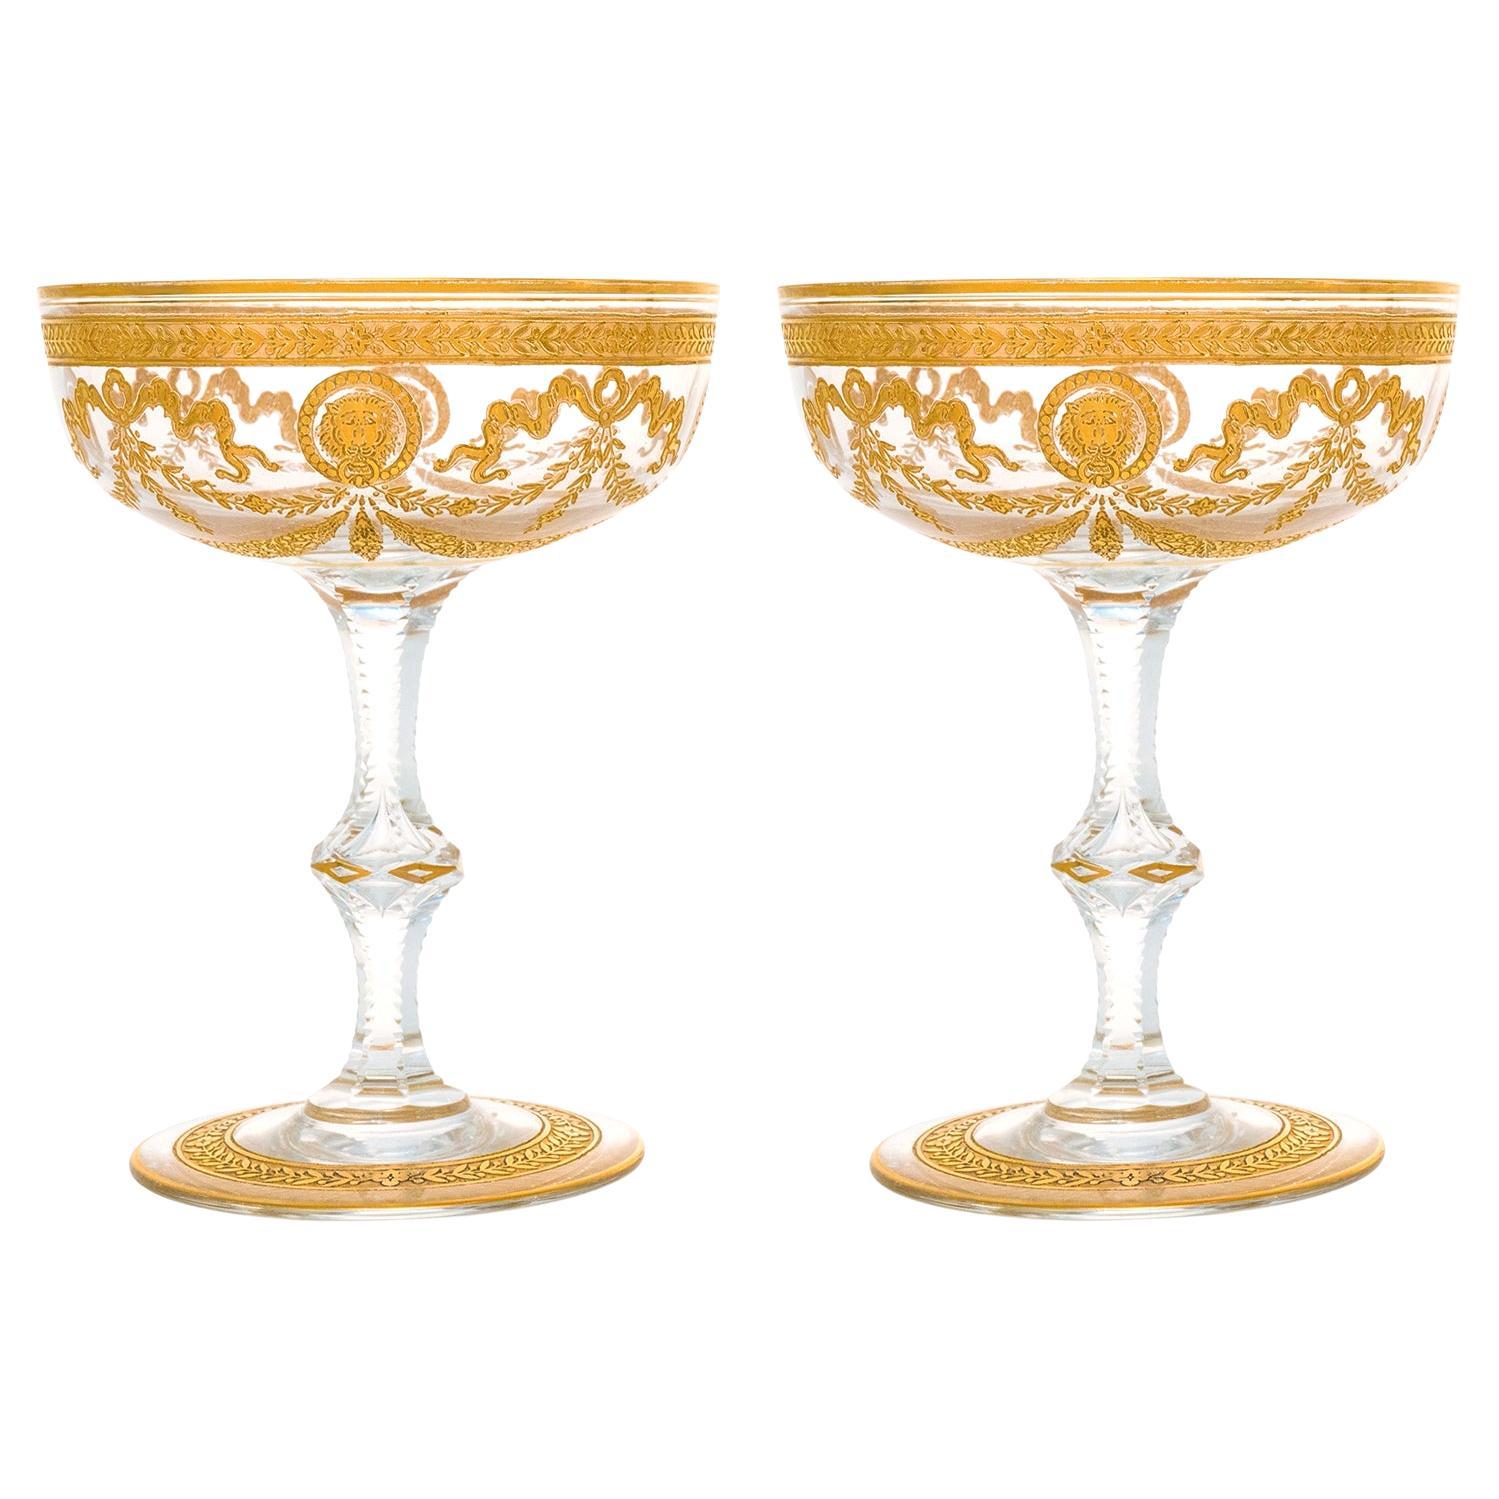 Rousseau Etched Champagne Glasses Set of 4